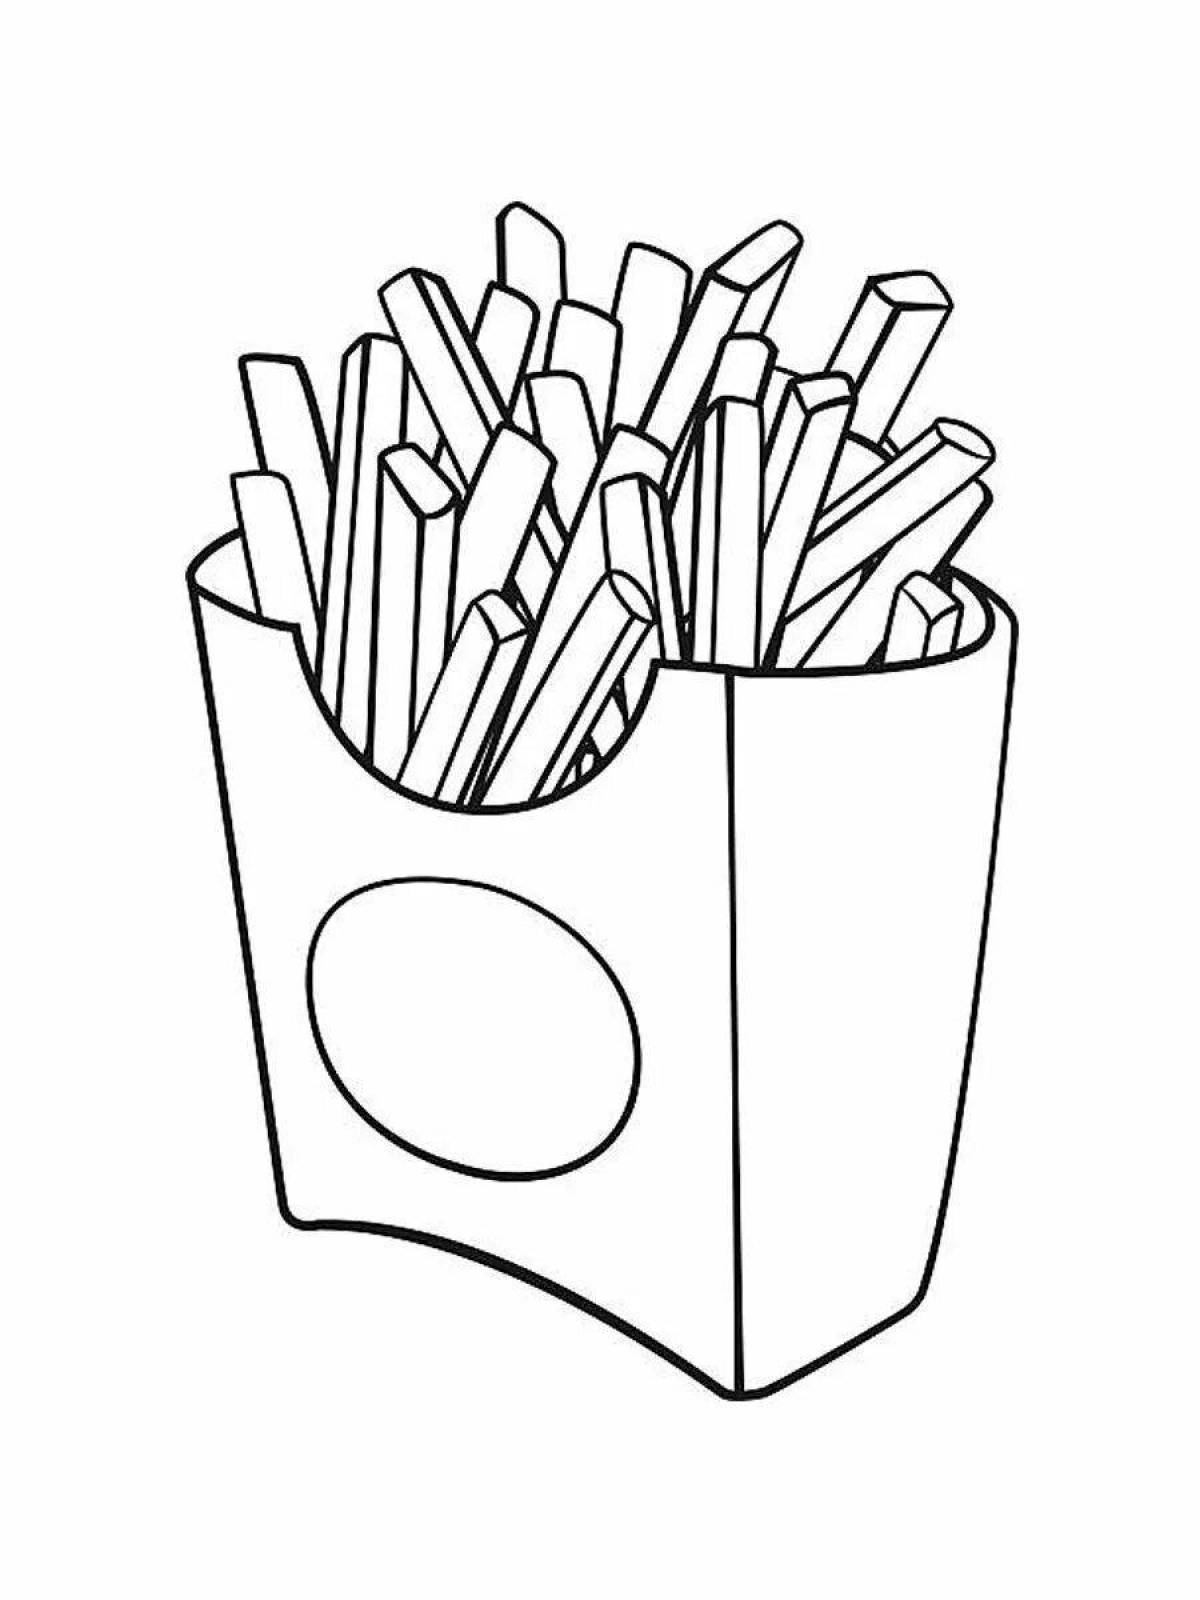 Adorable french fries coloring book for kids